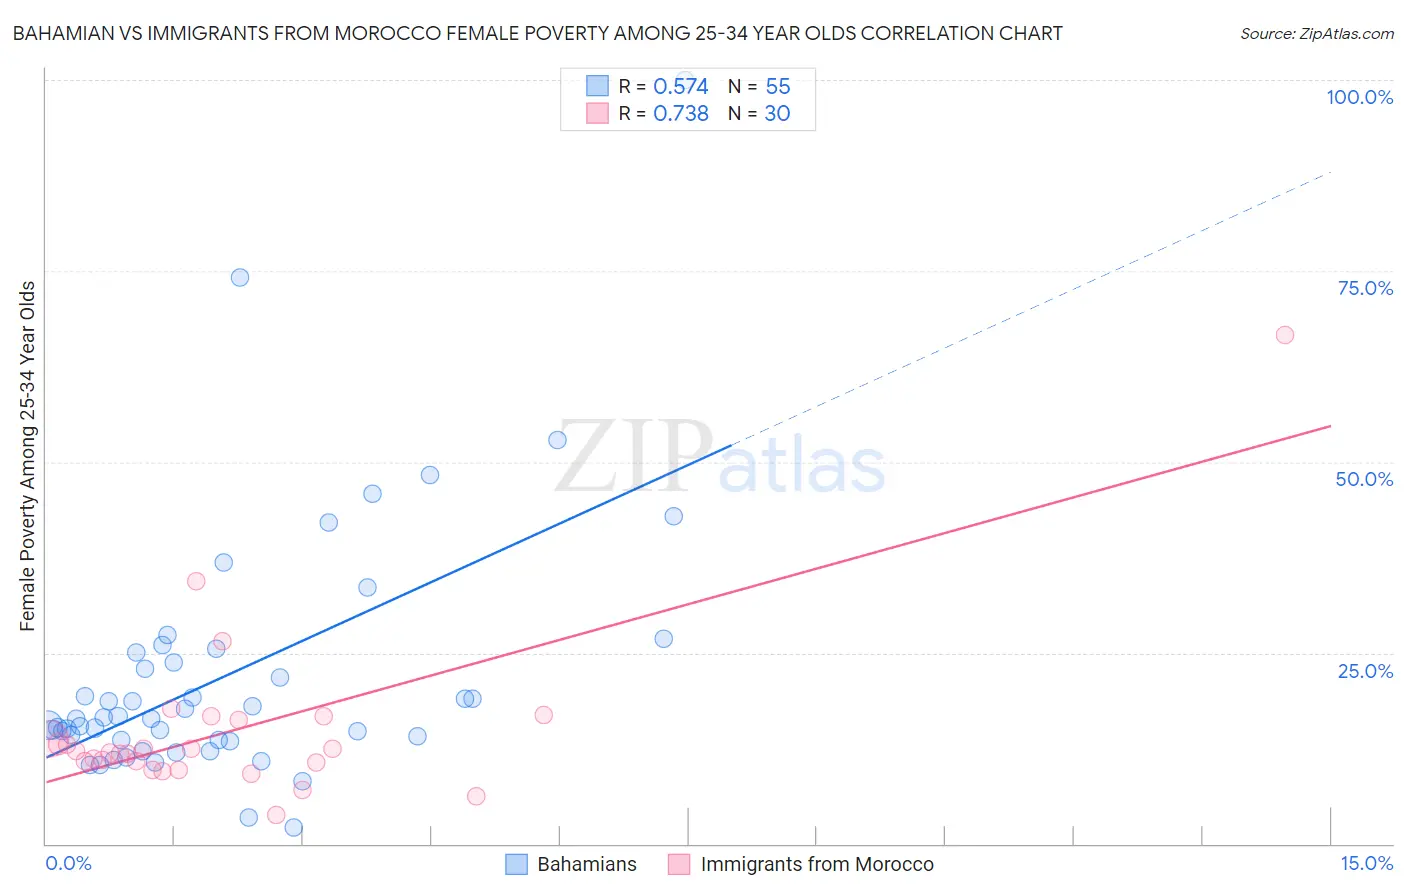 Bahamian vs Immigrants from Morocco Female Poverty Among 25-34 Year Olds